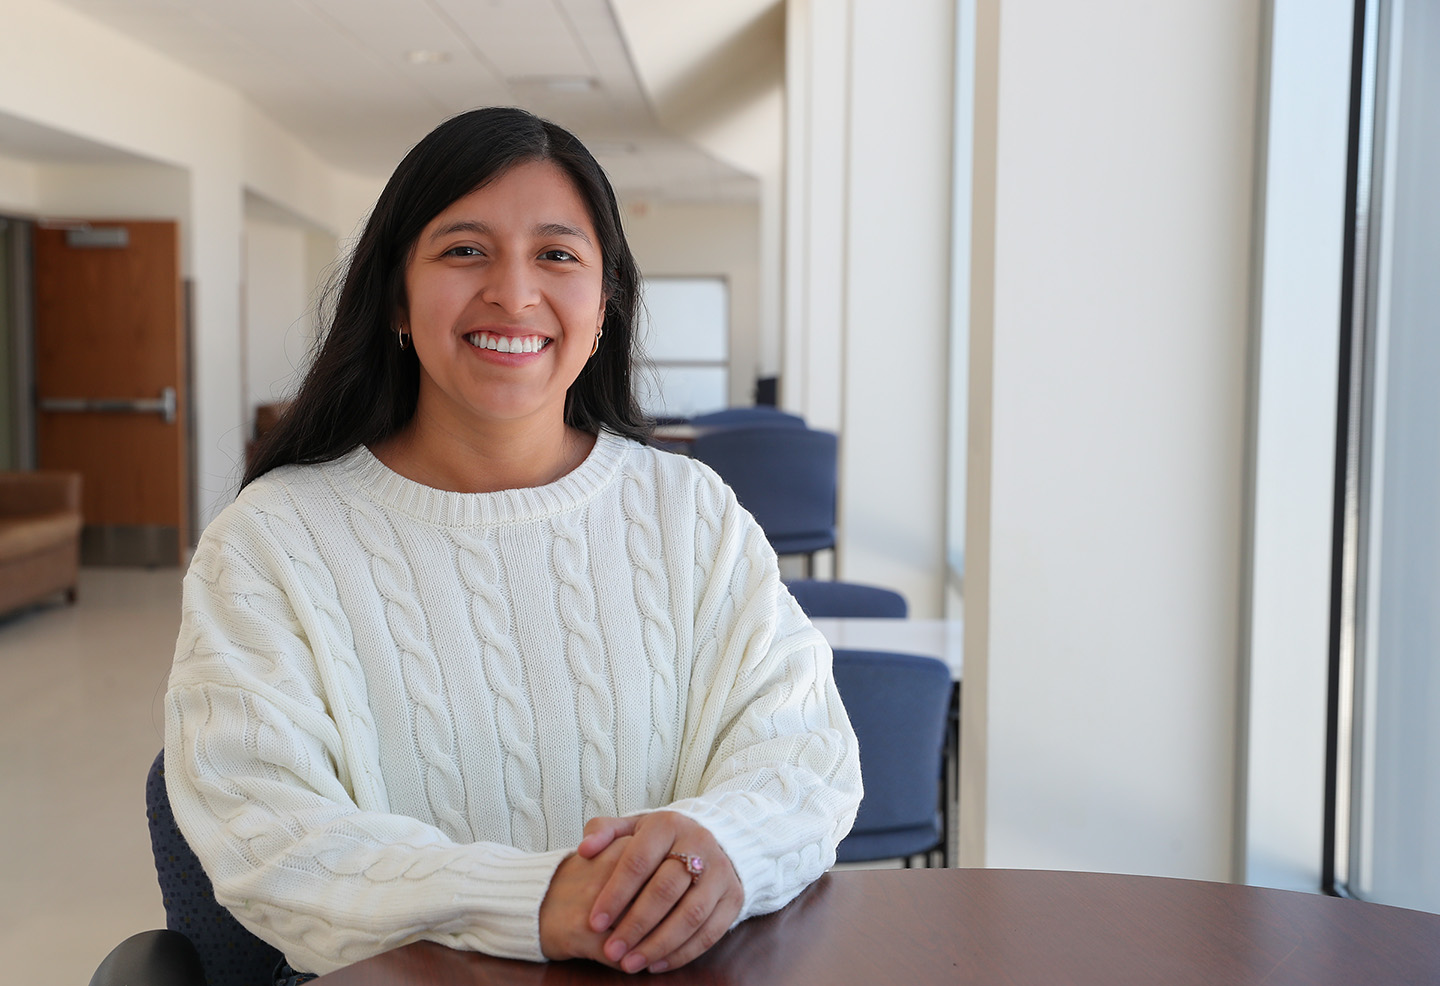 Maritza Calmo Martin is a senior at UNK, where she’s studying business administration with a health science minor. She’s part of the pre-dental hygiene program. (Photo by Erika Pritchard, UNK Communications)